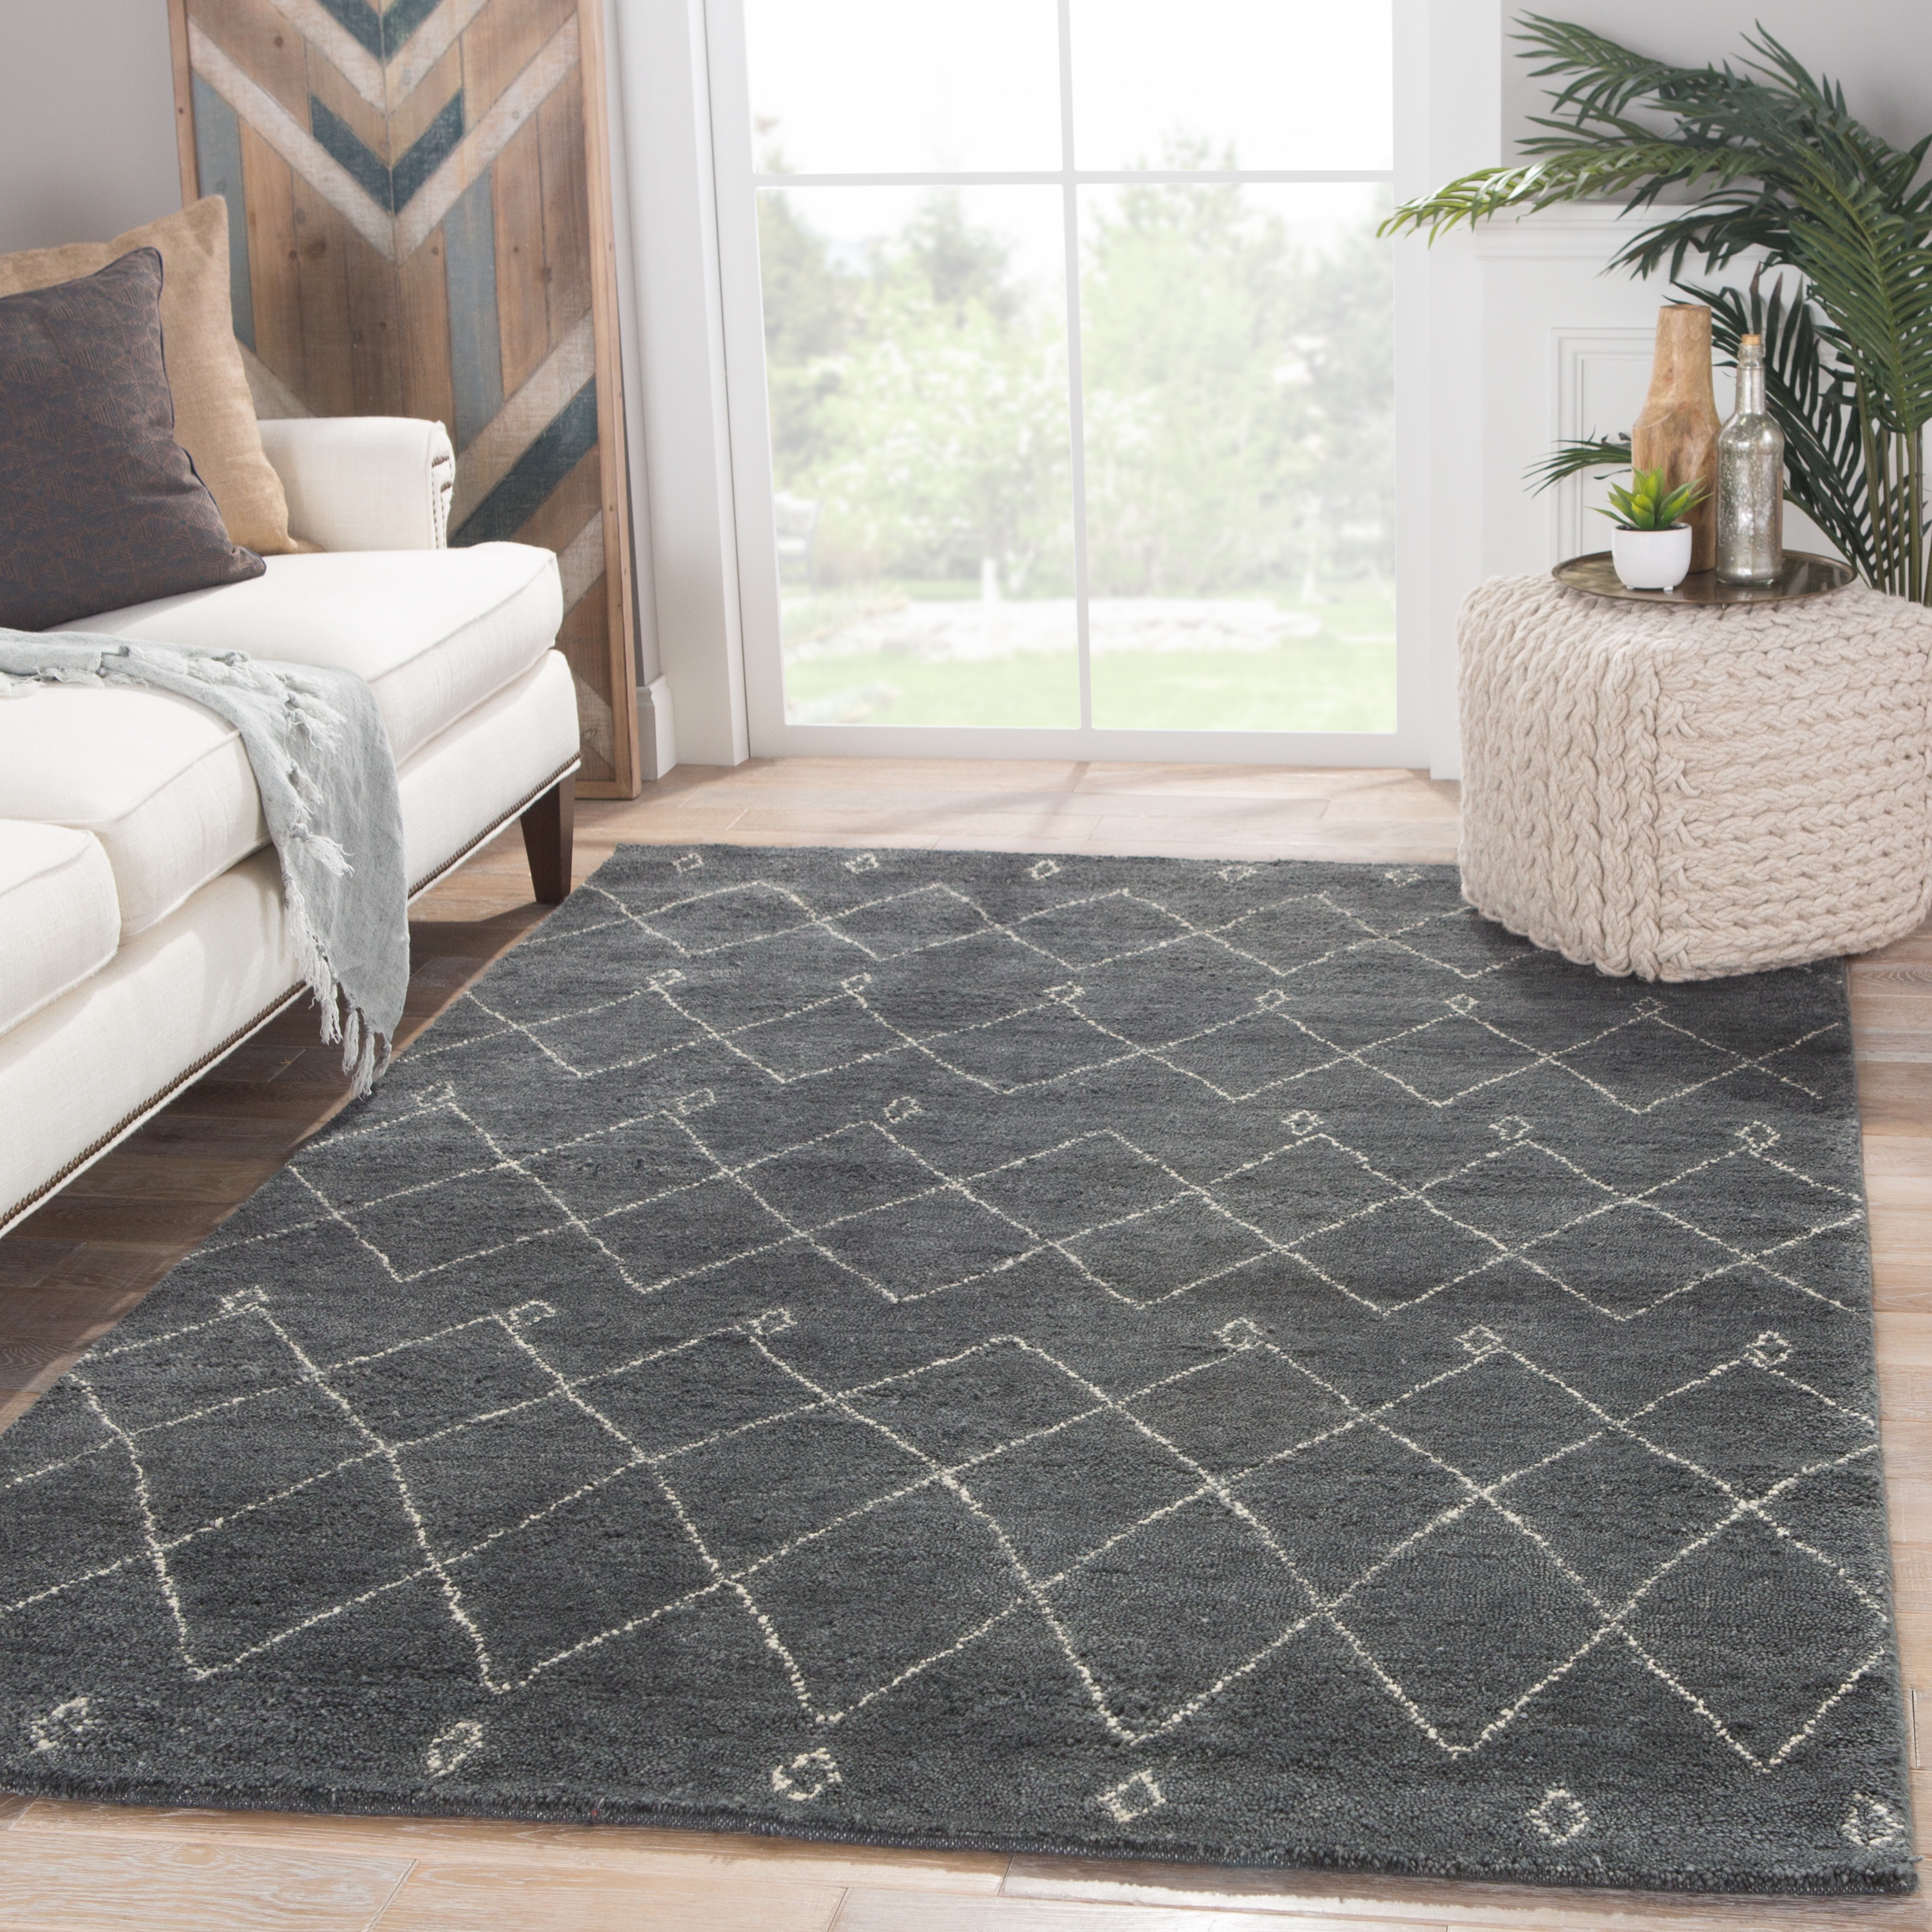 Casablanca Hand-Knotted Trellis Gray/ White Area Rug (8x10) - Image 4